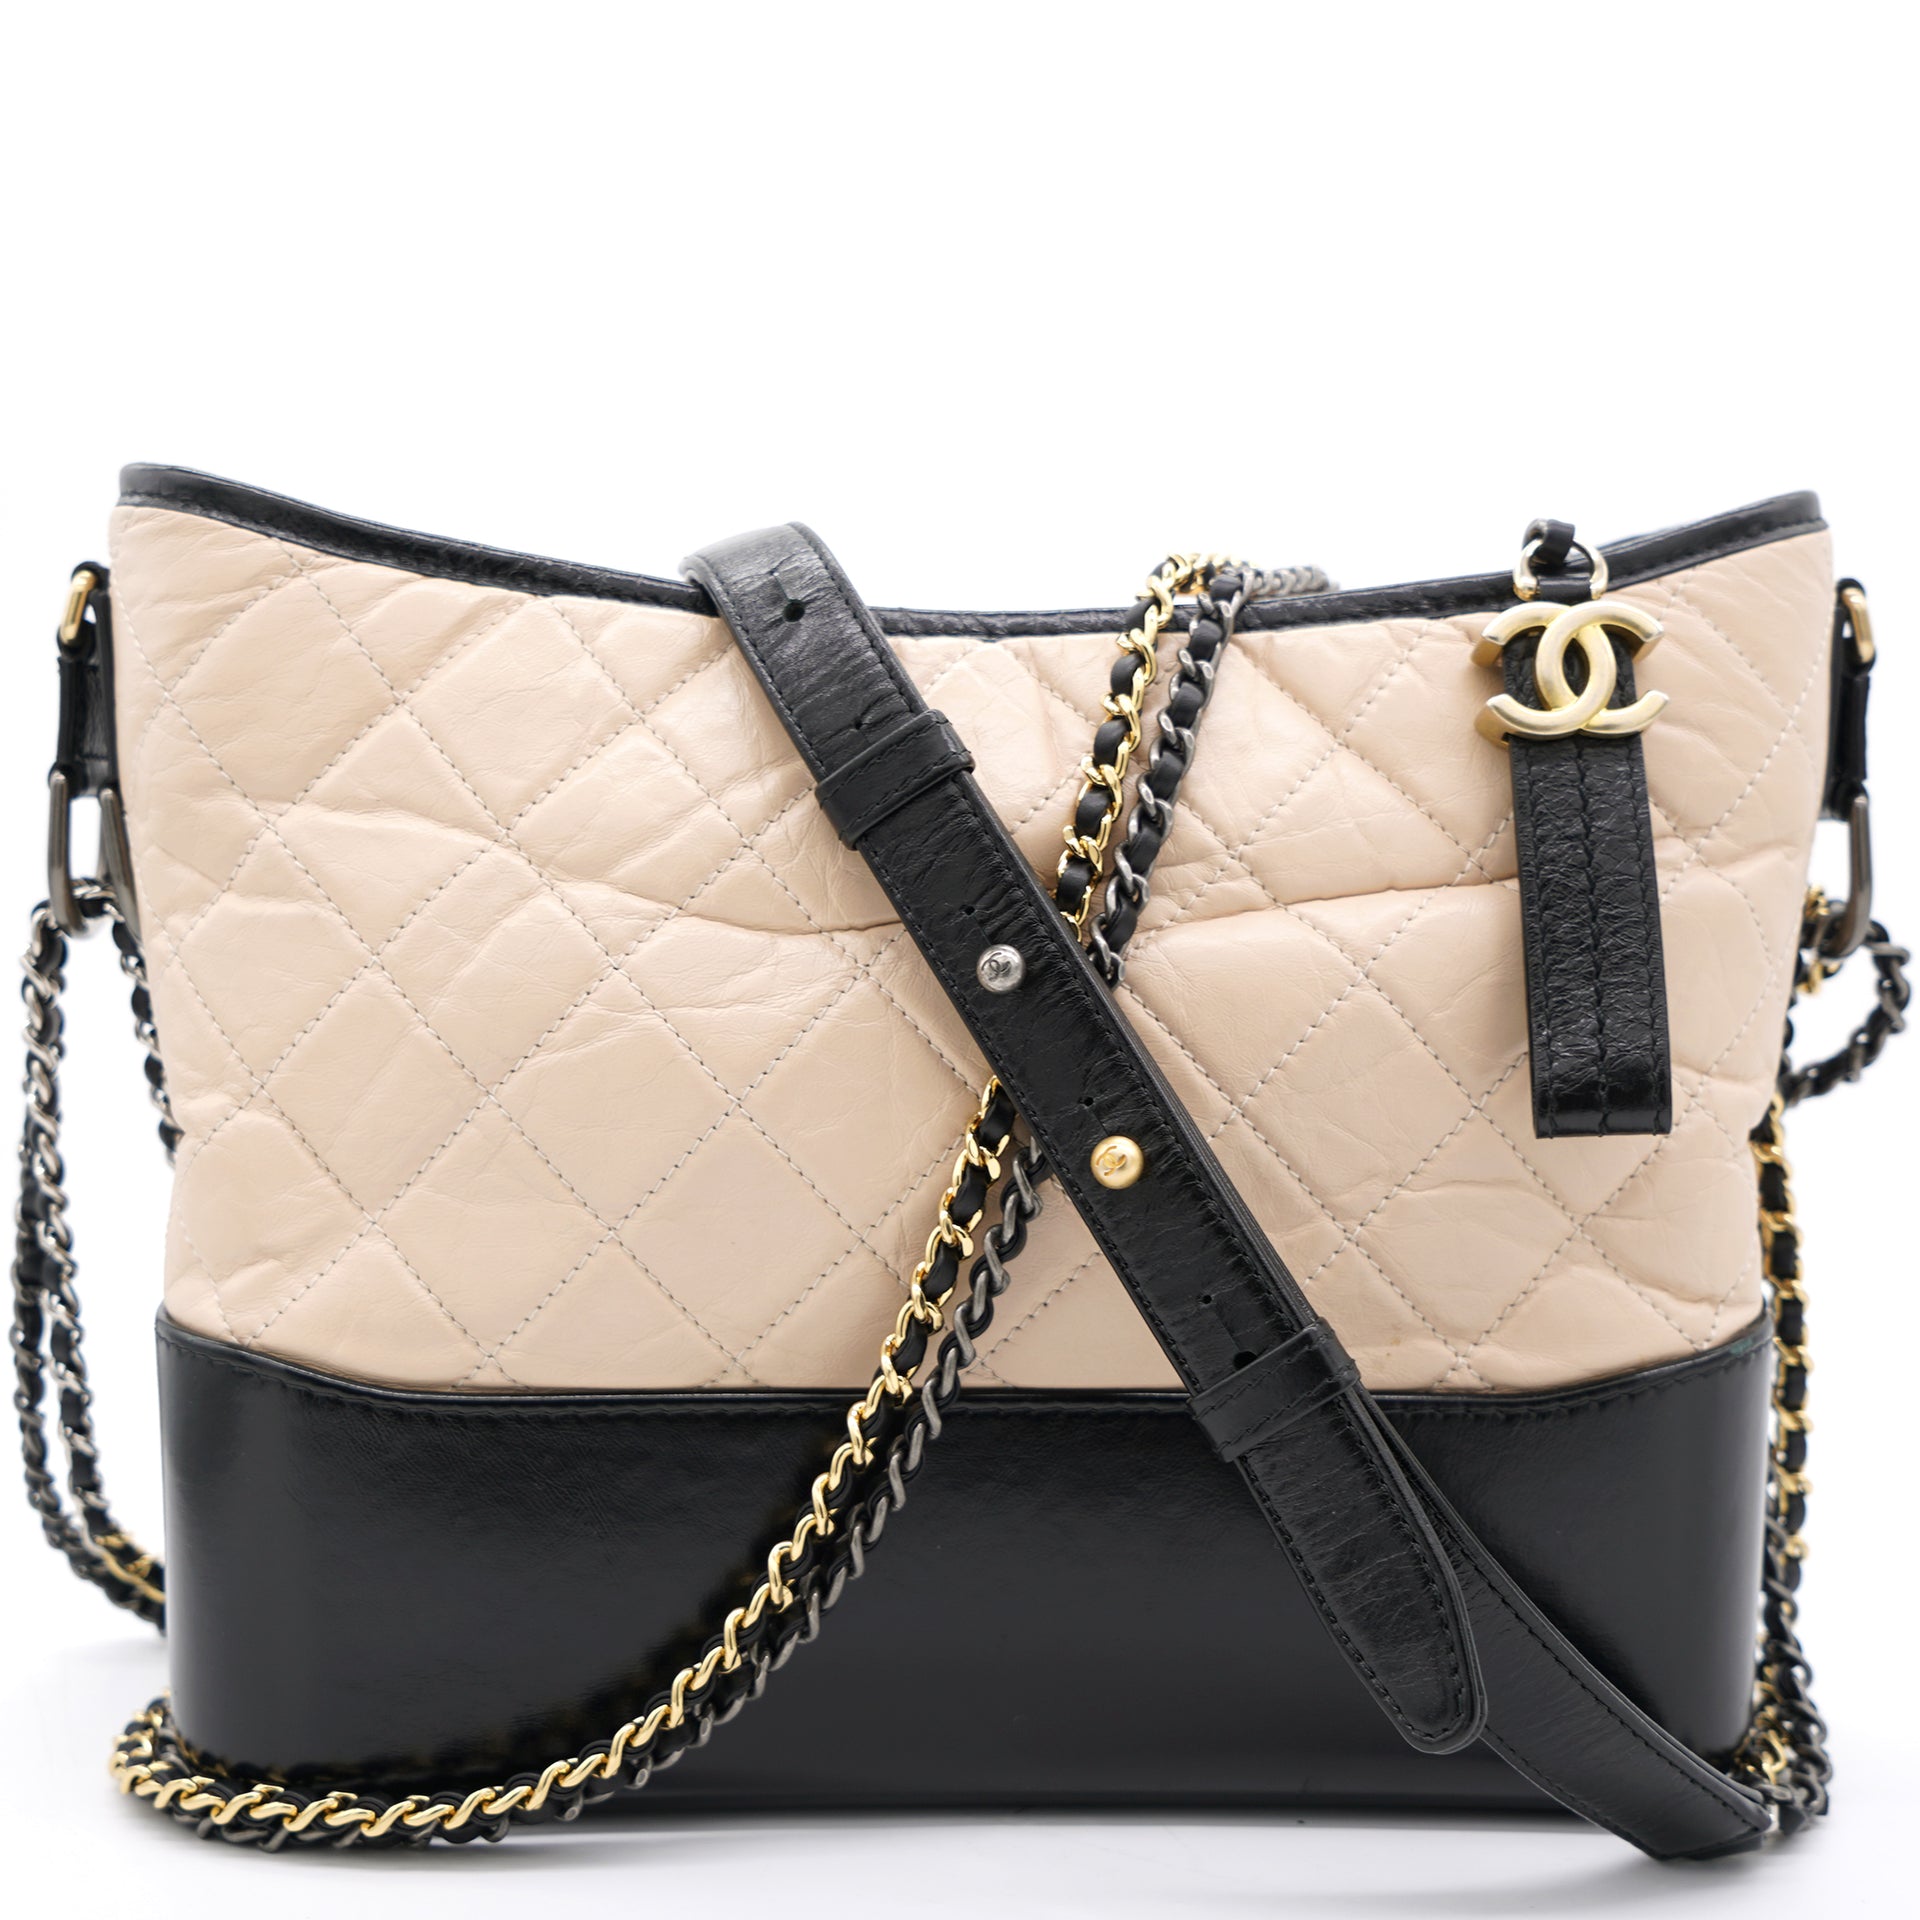 Chanel Gabrielle Quilted Aged Calfskin Beige Black Hobo Bag For